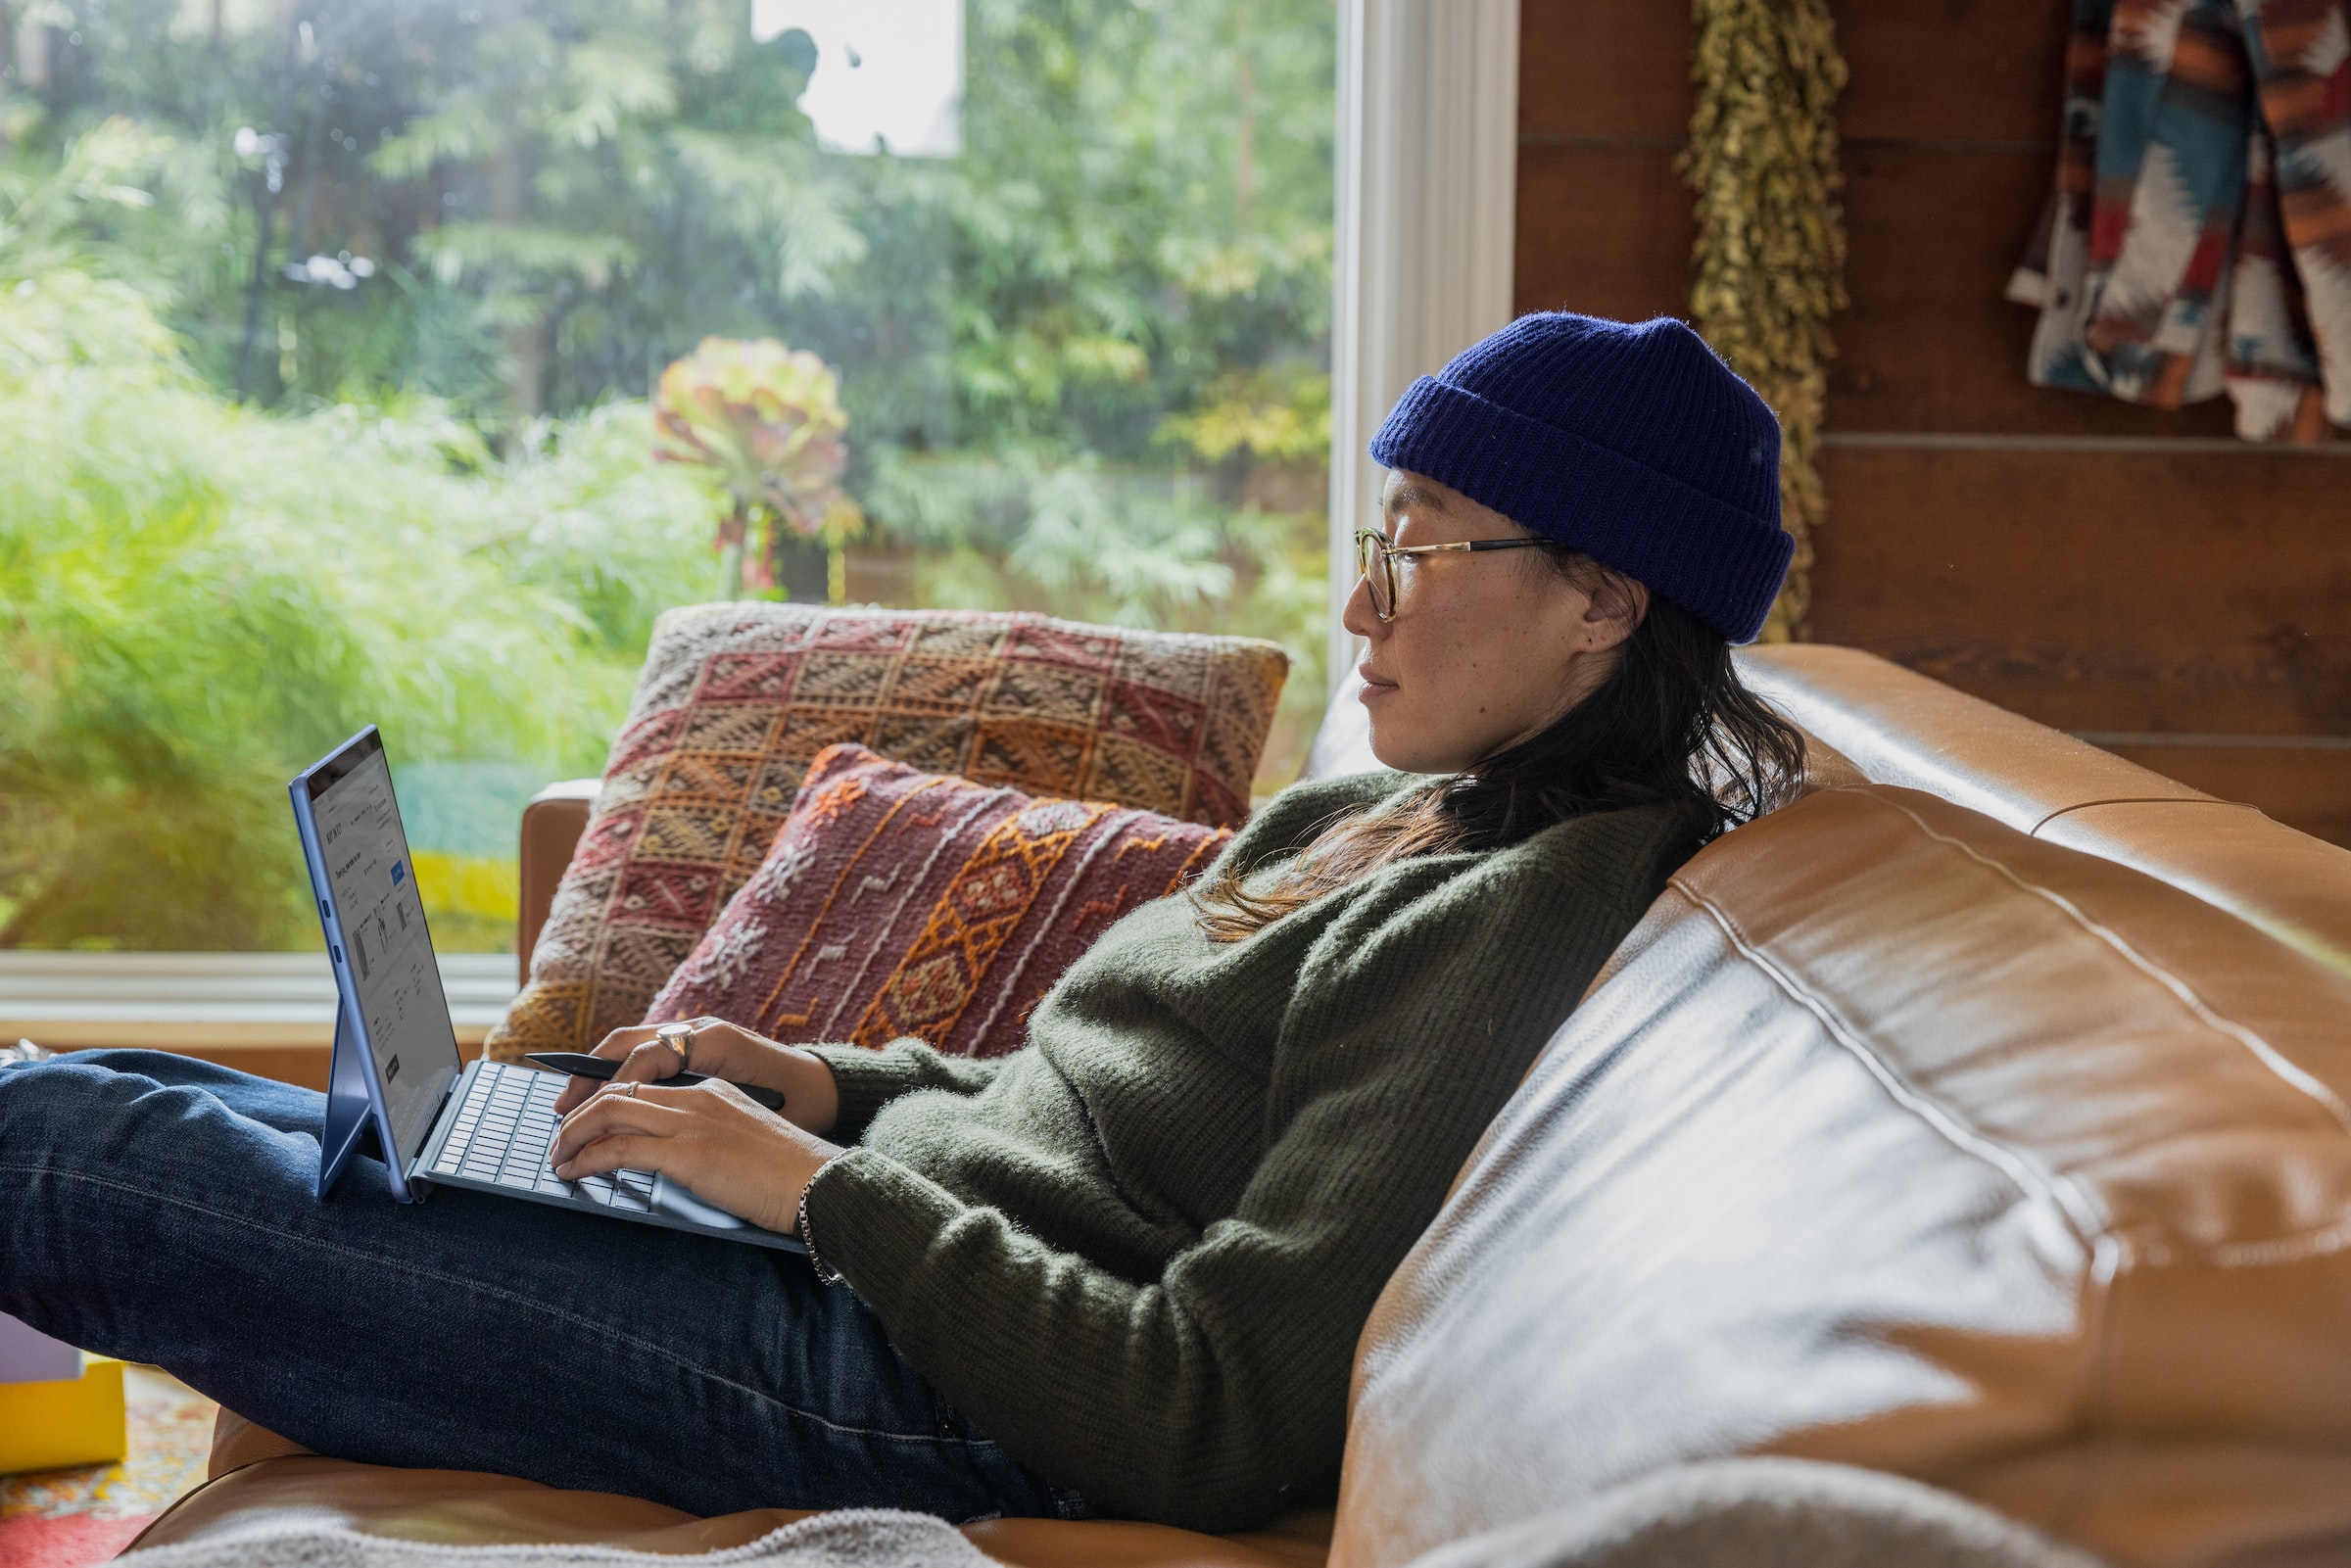 asian woman sits on a sofa while working with an ipad, a keyboard, and a stylus stock image